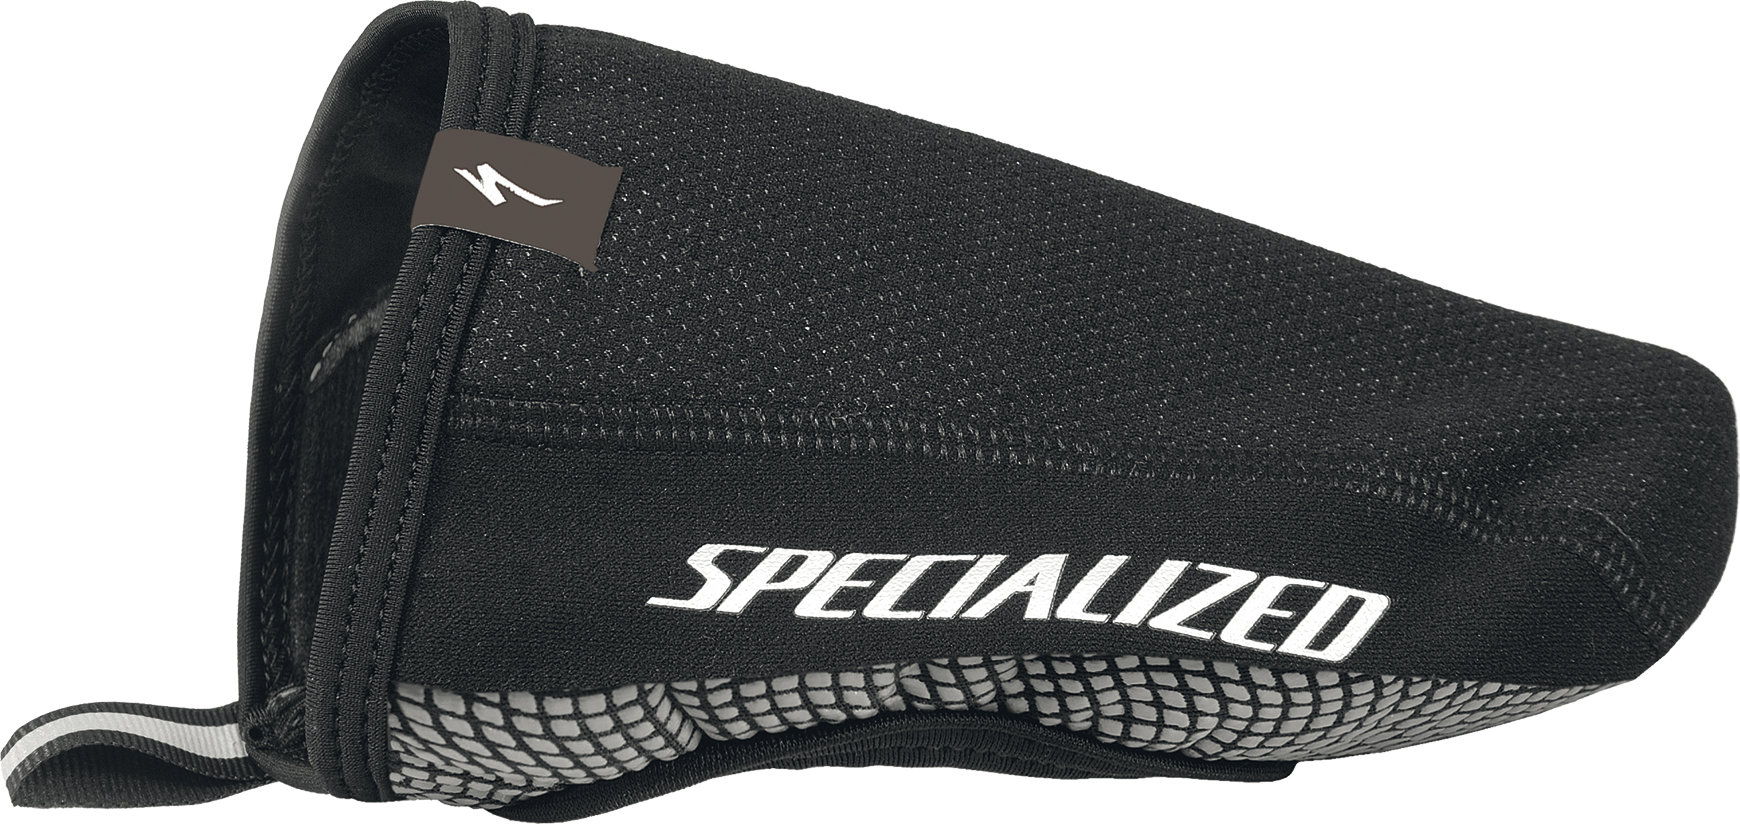 specialized toe covers